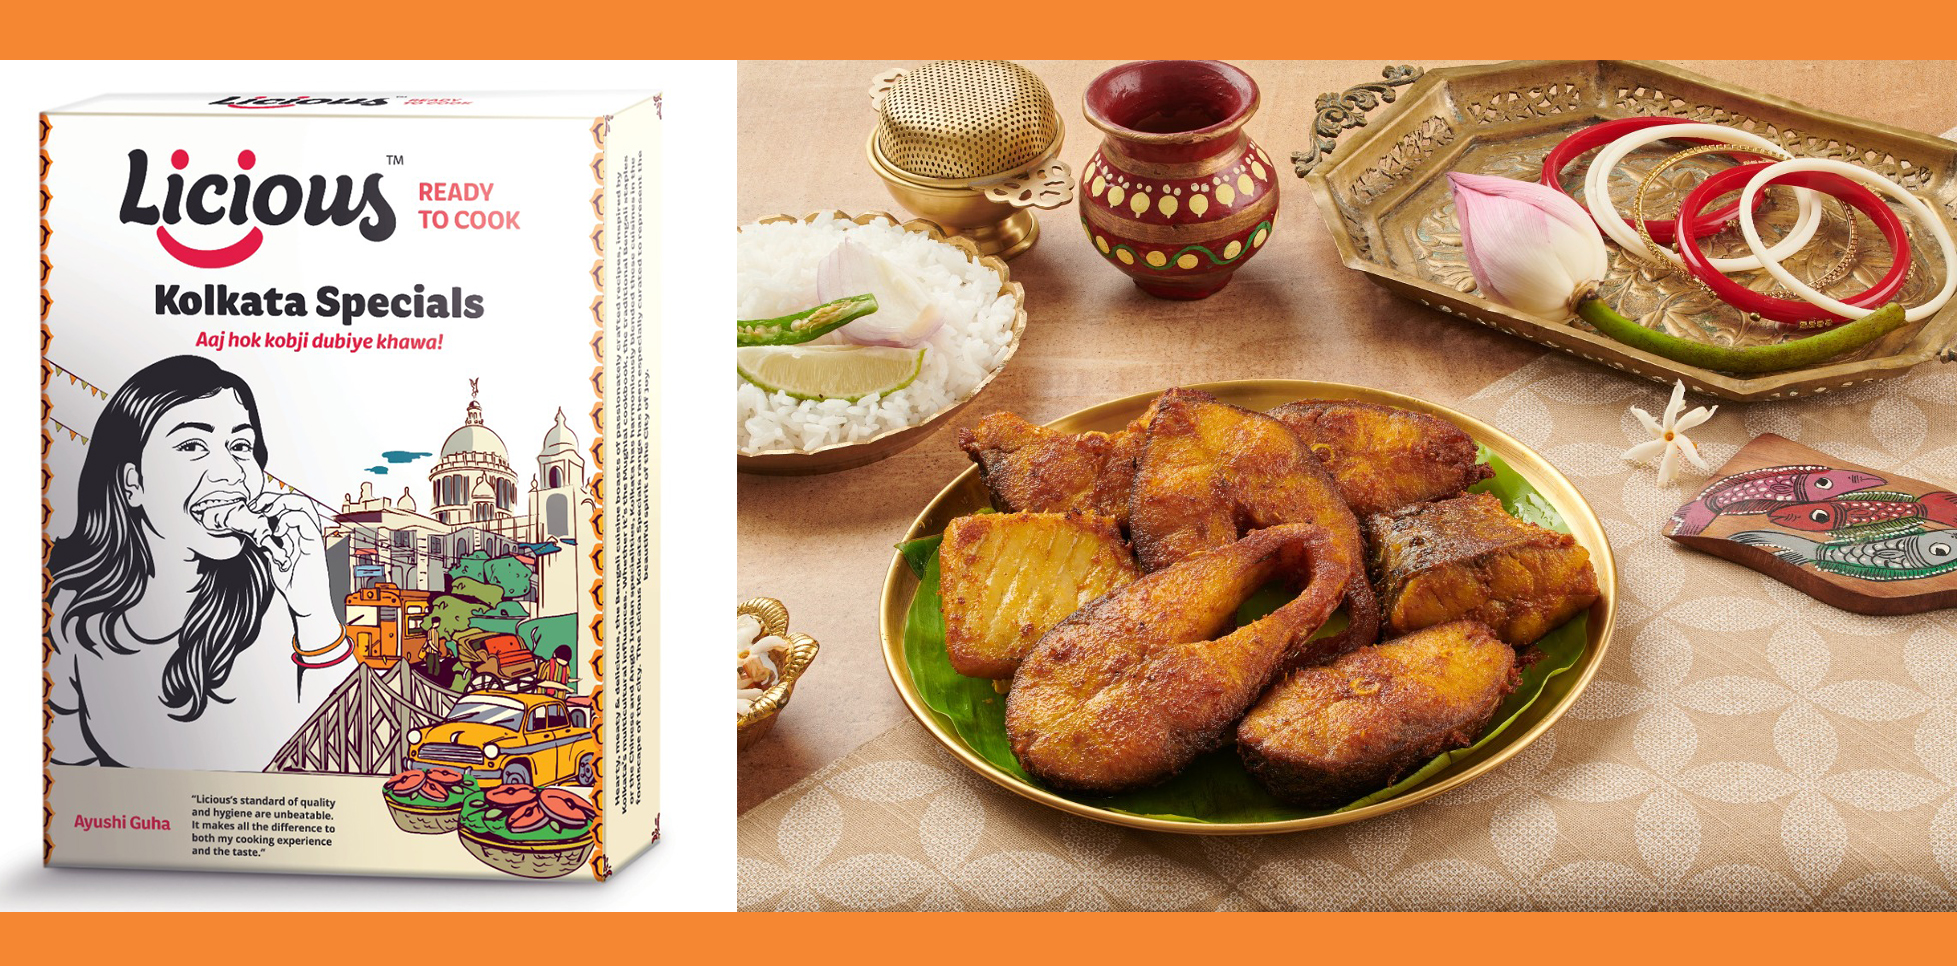 🍗🍖Licious Reinstates Its Commitment to Regional Consumers with The Durga Pujo Campaign.